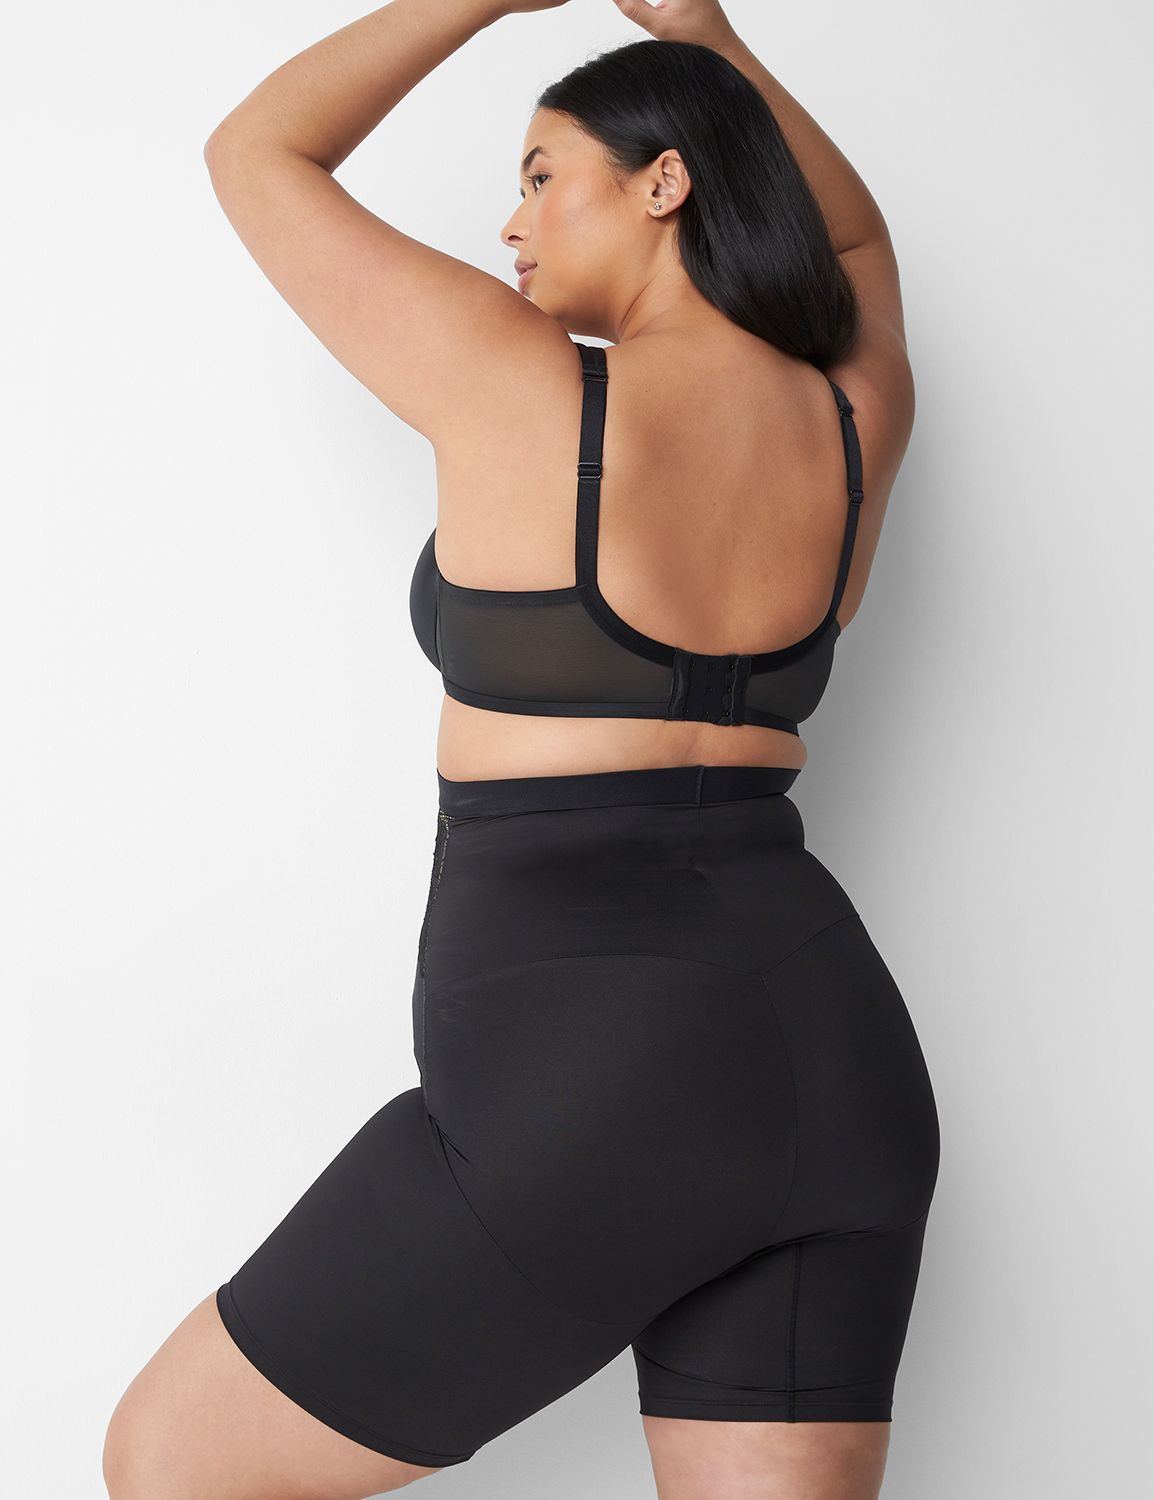 Plus Size Activewear Try On Haul  Seamless Workout Shorts for THICK  THIGHS! 